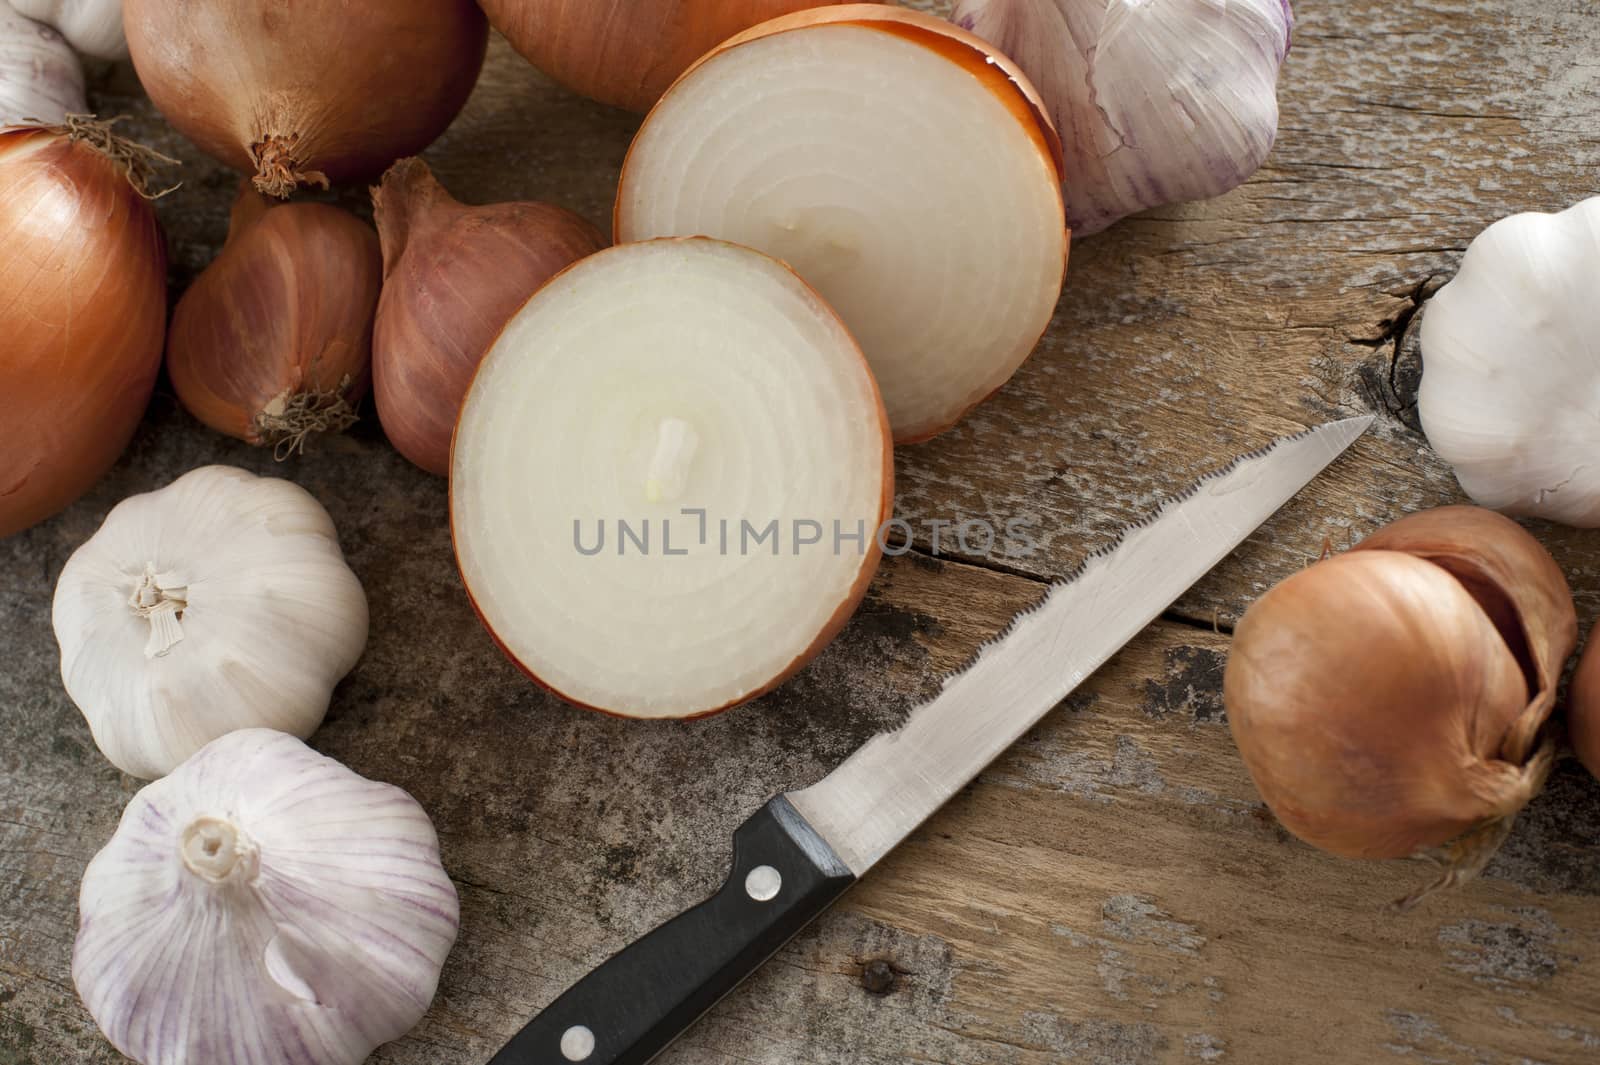 High Angle Still Life of Bounty of Onions and Garlic Bulbs Being Sliced and Prepared by Sharp Knife on Rustic Wooden Table